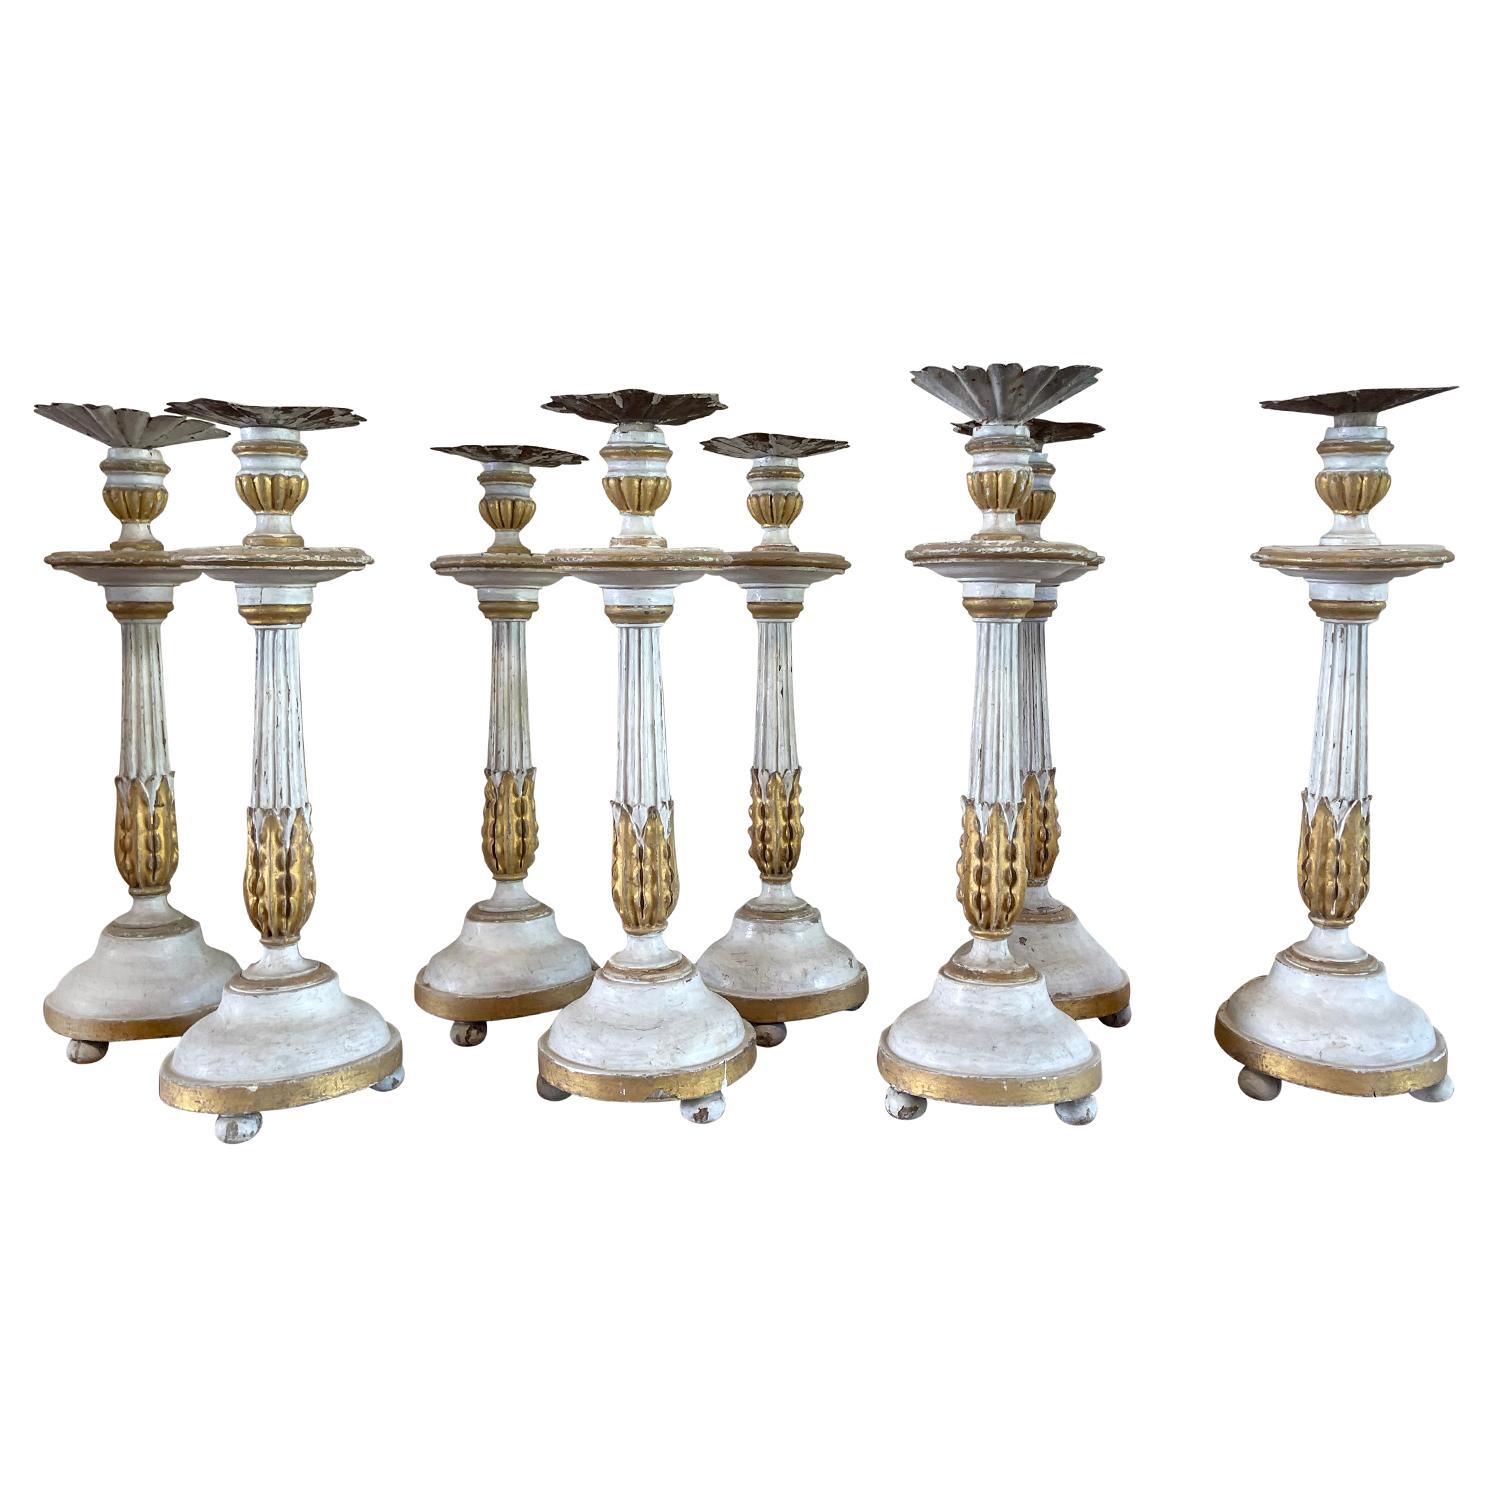 An antique Swedish pair of mid 19th Century Gustavian candle holders made of hand crafted Pinewood, in good condition. The sticks are patinated in white with gilded décor Acanthus leaves and elevated by three small feet. Topped with a metal plate